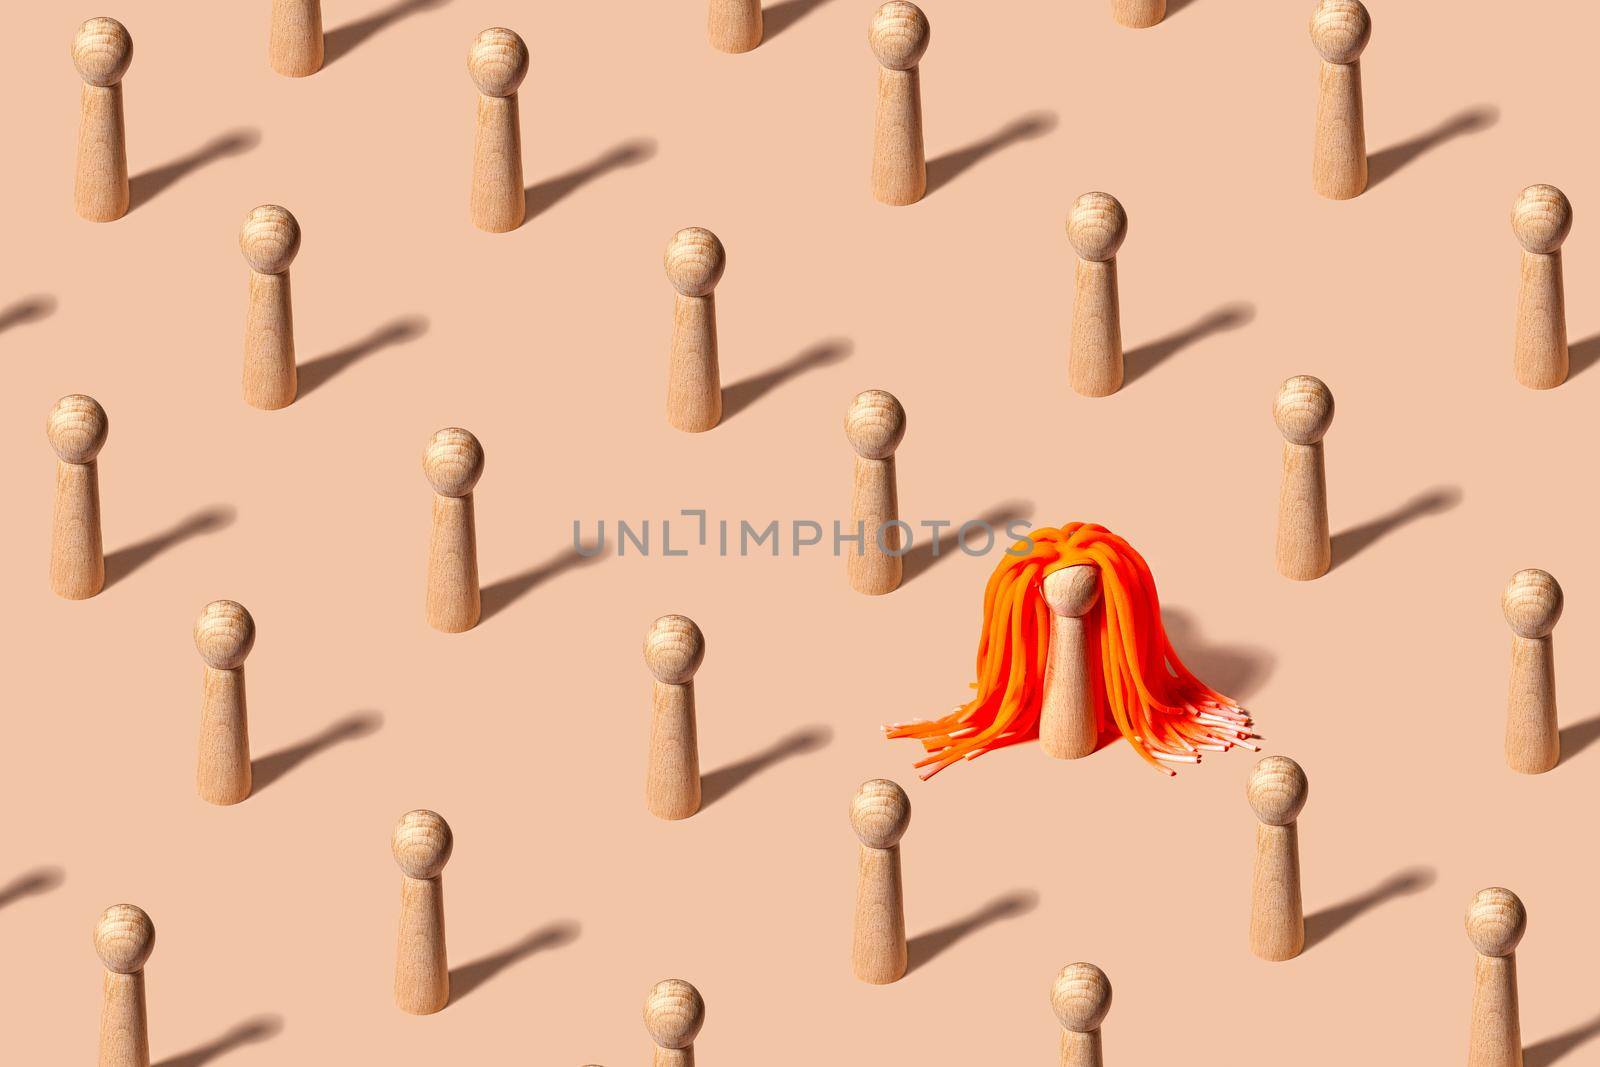 Creative pattern with equal figures representing people, one standing out with striking orange hair - concept of diversity by madeleine_steinbach